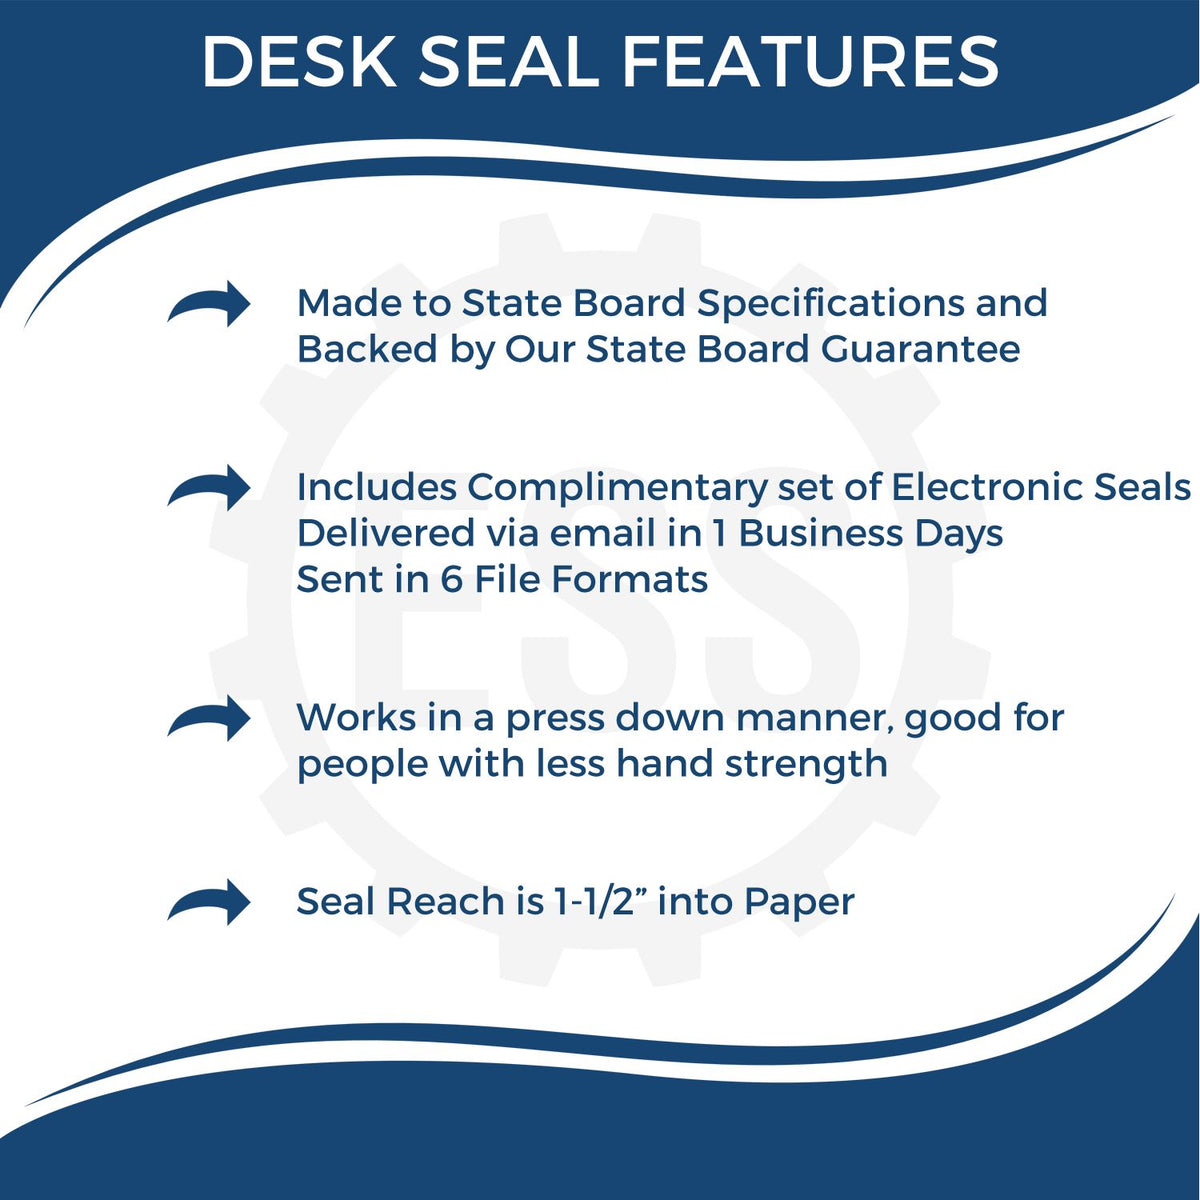 A picture of an infographic highlighting the selling points for the Pennsylvania Geologist Desk Seal